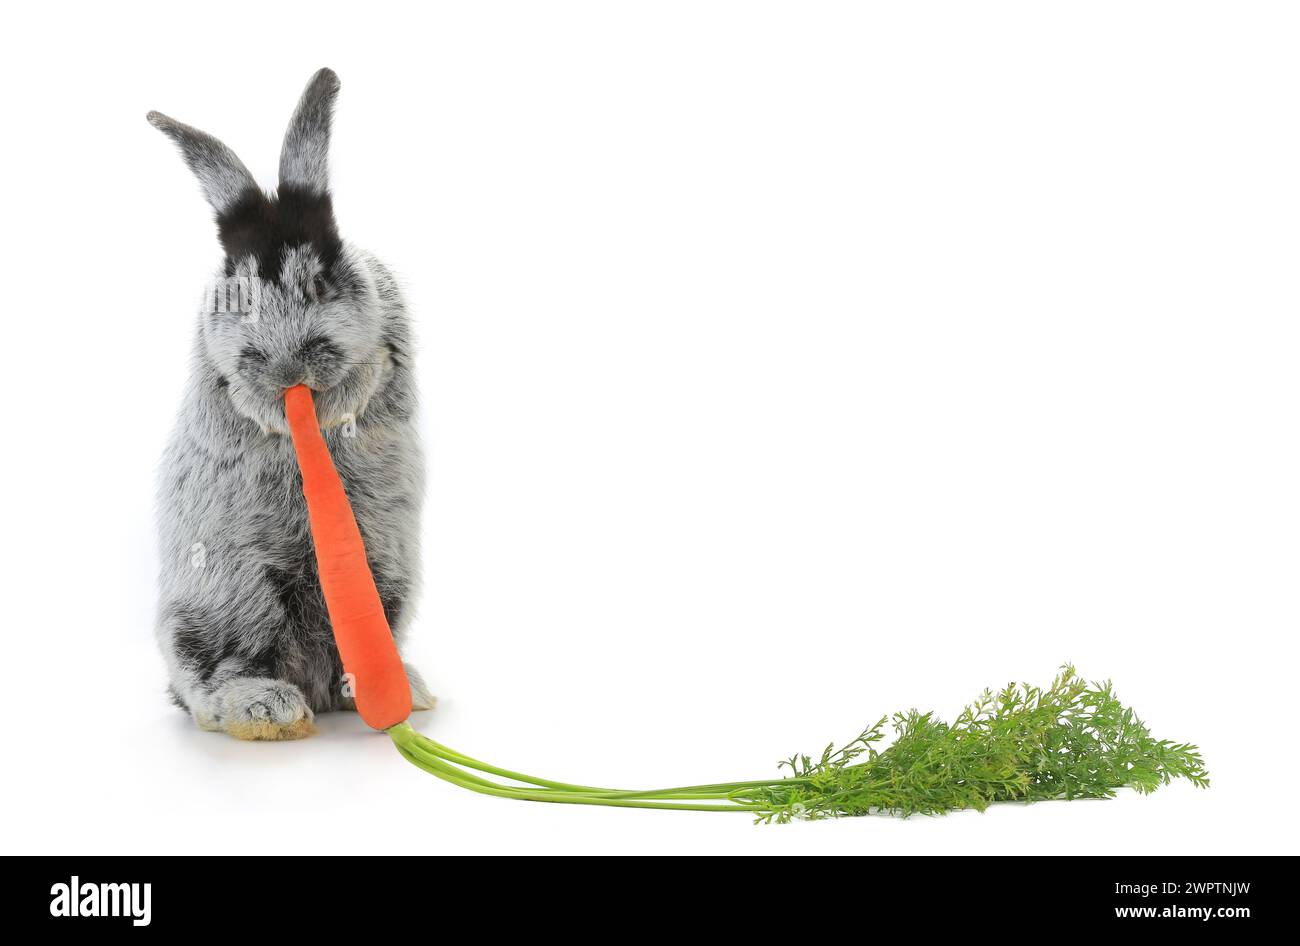 Rabbit with carrot isolated on white background Stock Photo